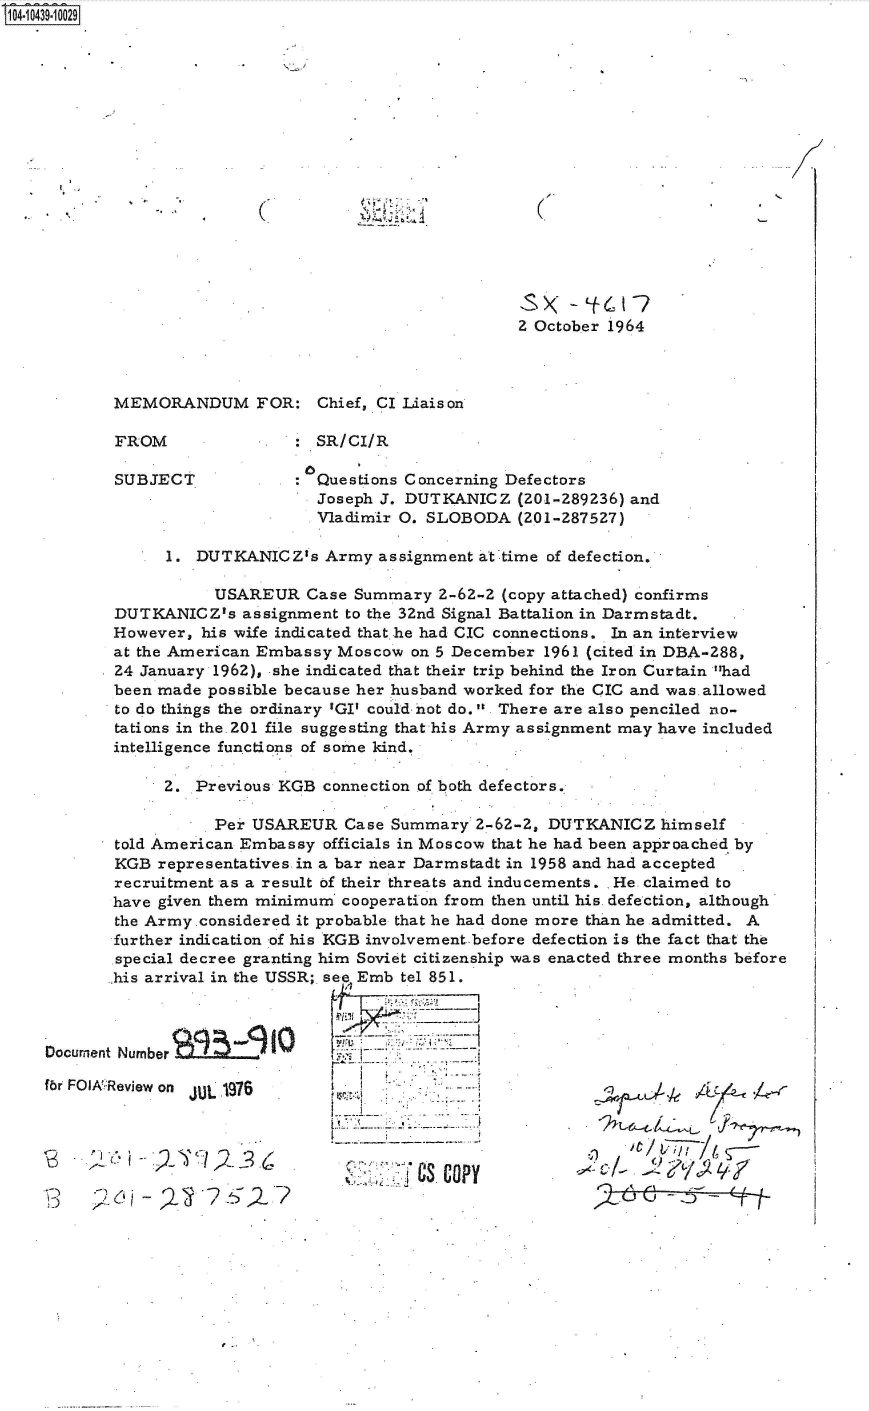 handle is hein.jfk/jfkarch48728 and id is 1 raw text is: S1O4~iO439~1OO29


(


(


2 October 1964


MEMORANDUM FOR: Chief, CI Liaison

FROM             .    SR/CI/R

SUBJECT: Questions Concerning Defectors
                      Joseph J. DUTKANICZ   (O-289236)  and
                      Vladimir 0. SLOBODA   (201-287527)

      1. DUTKANICZ's   Army  assignment at time of defection.

           USAREUR   Case Summary  2-62-2 (copy attached) confirms
 DUTKANICZ's  assignment to the 32nd Signal Battalion in Darmstadt.
 However, his wife indicated that he had CIC connections. In an interview
 at the American Embassy Moscow on 5 December  1961 (cited in DBA-288,
 24 January 1962), she indicated that their trip behind the Iron Curtain had
 been made possible because her husband worked for the CIC and was.allowed
 to do things the ordinary 'GI' could not do. There are also penciled no-
 tations in the. 201 file suggesting that his Army assignment may have included
 intelligence functions of some kind.

      2. Previous KGB  connection of both defectors.

           Per USAREUR   Case Summary  2-62-2, DUTKANICZ   himself
 told American Embassy officials in Moscow that he had been approached by
 KGB representatives in a bar near Darmstadt in 1958 and had accepted
 recruitment as a result of their threats and inducements. He claimed to
 have given them minimum cooperation from then until his. defection, although
 the Army.considered it probable that he had done more than he admitted. A
 further indication of his KGB involvement.before defection is the fact that the
 special decree granting him Soviet citizenship was enacted three months before
 his arrival in the USSR; see Emb tel 851.



 Number

Review on JUL 1976


AS COPY


it    ---


Qj5 2j~c/,3.6


Documnent

fbr FOI:I


